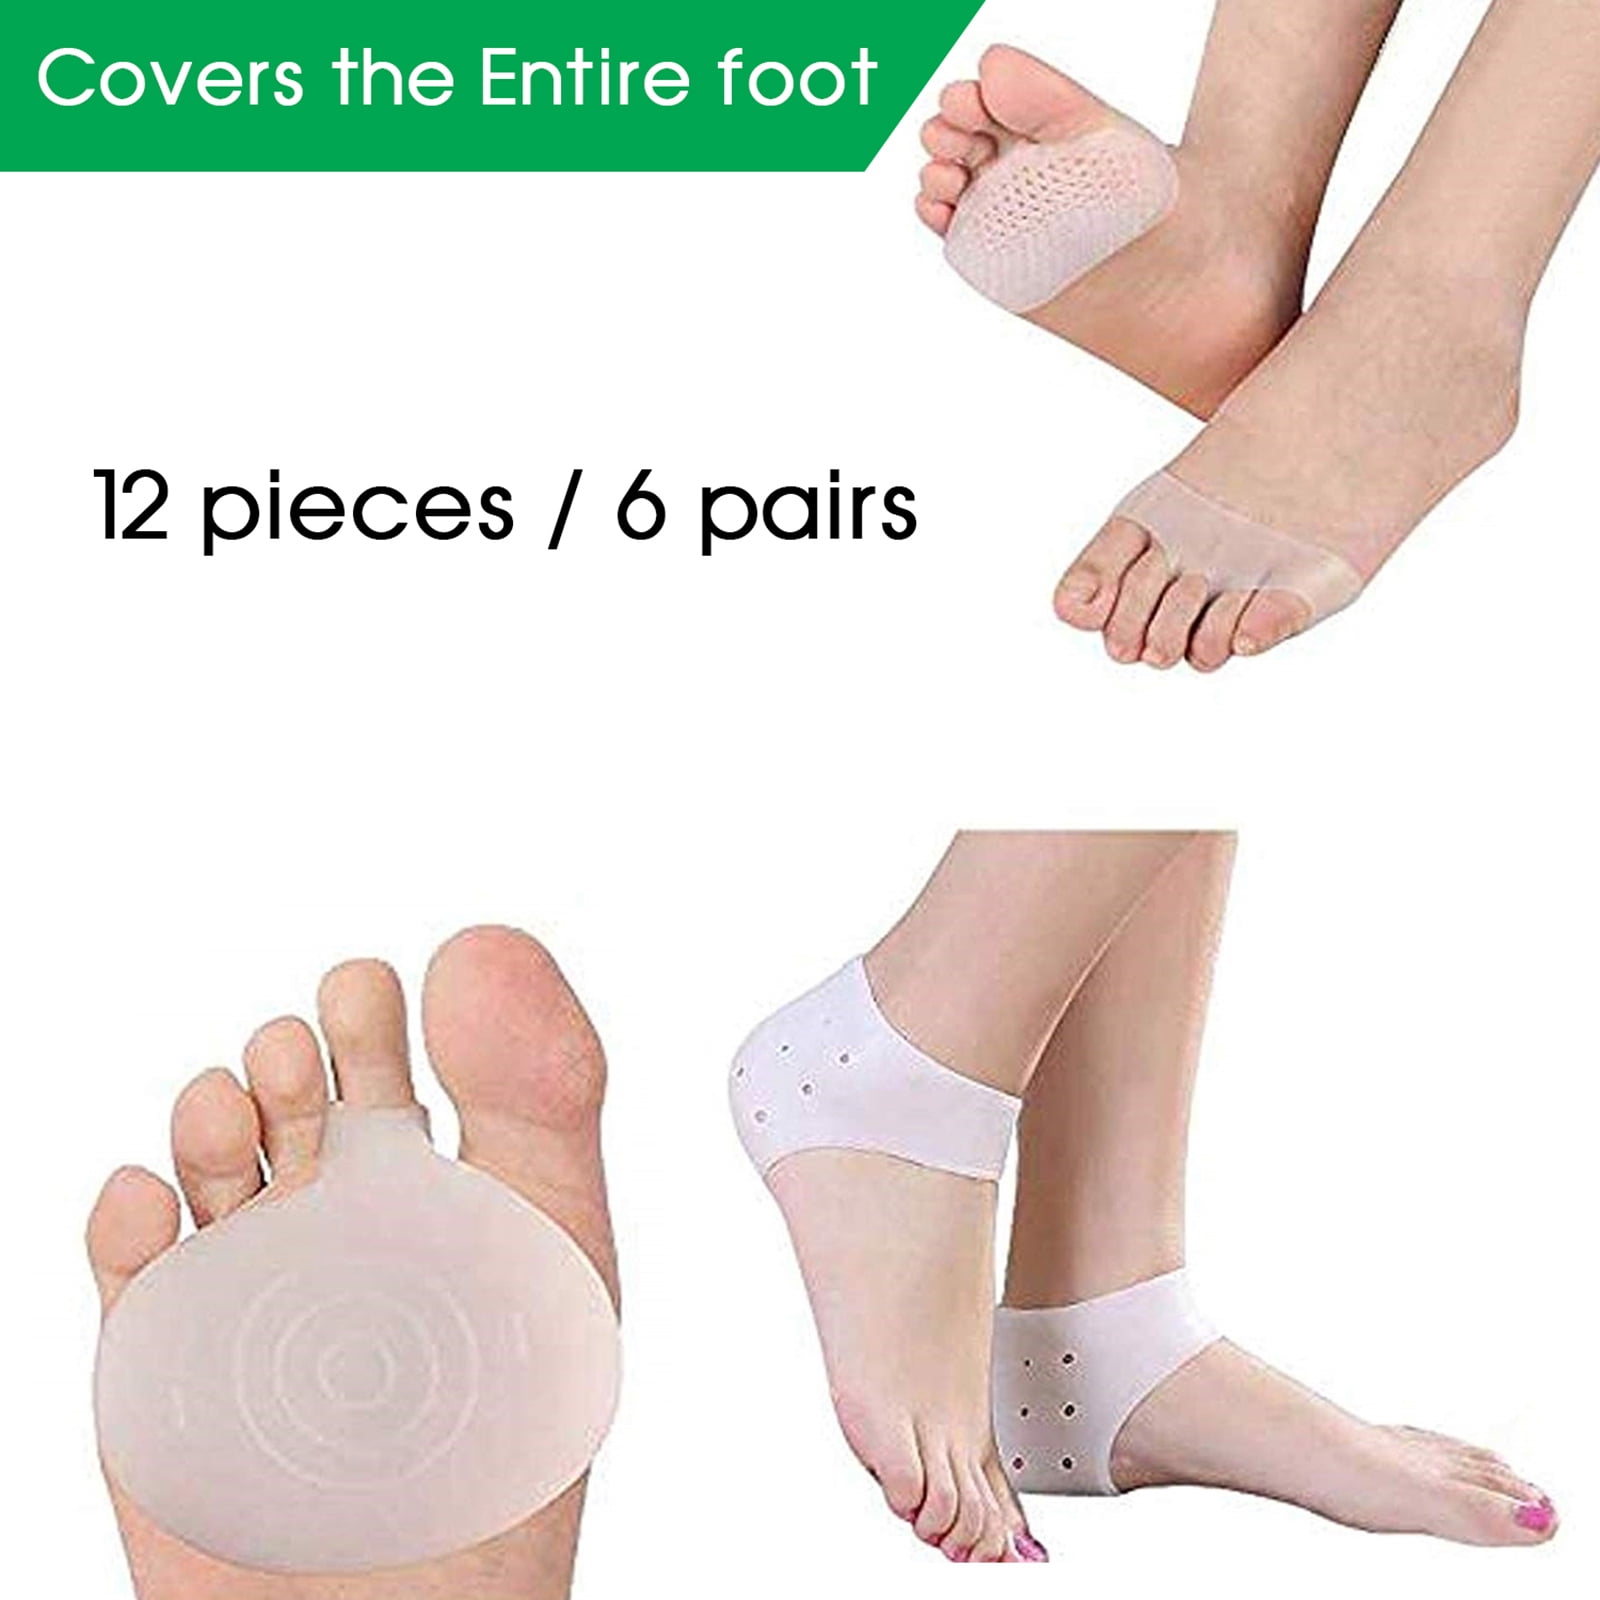 8-12 foot-care 1 pair Mens Silicone Insoles Pads Cushions Shoes Gel Walk Run